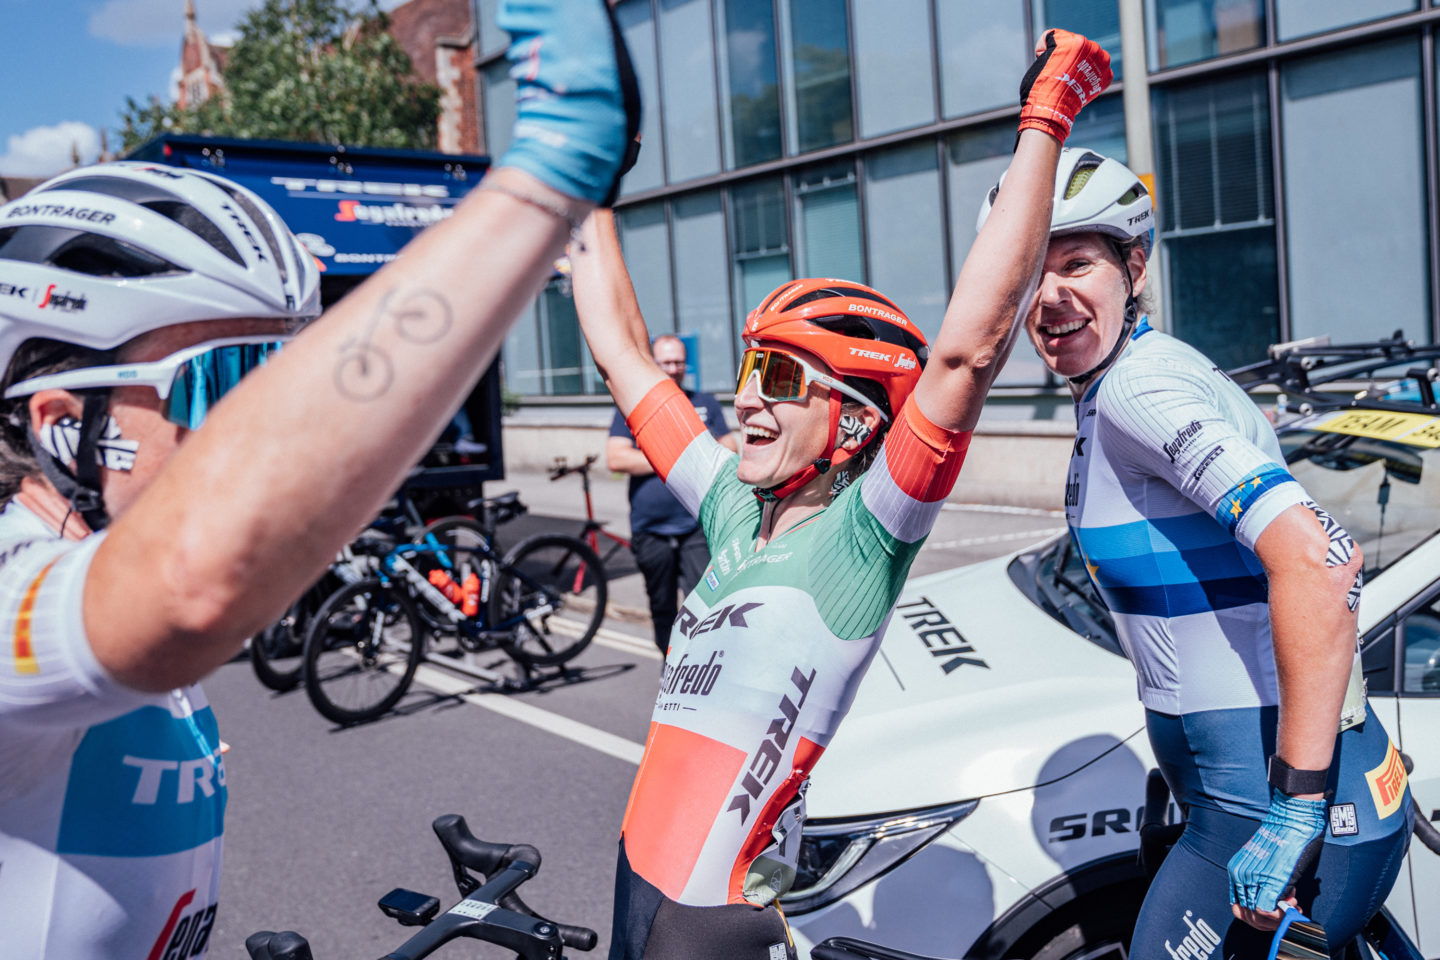 Never say never: Elisa Longo Borghini wins the overall in a thrilling bunch sprint